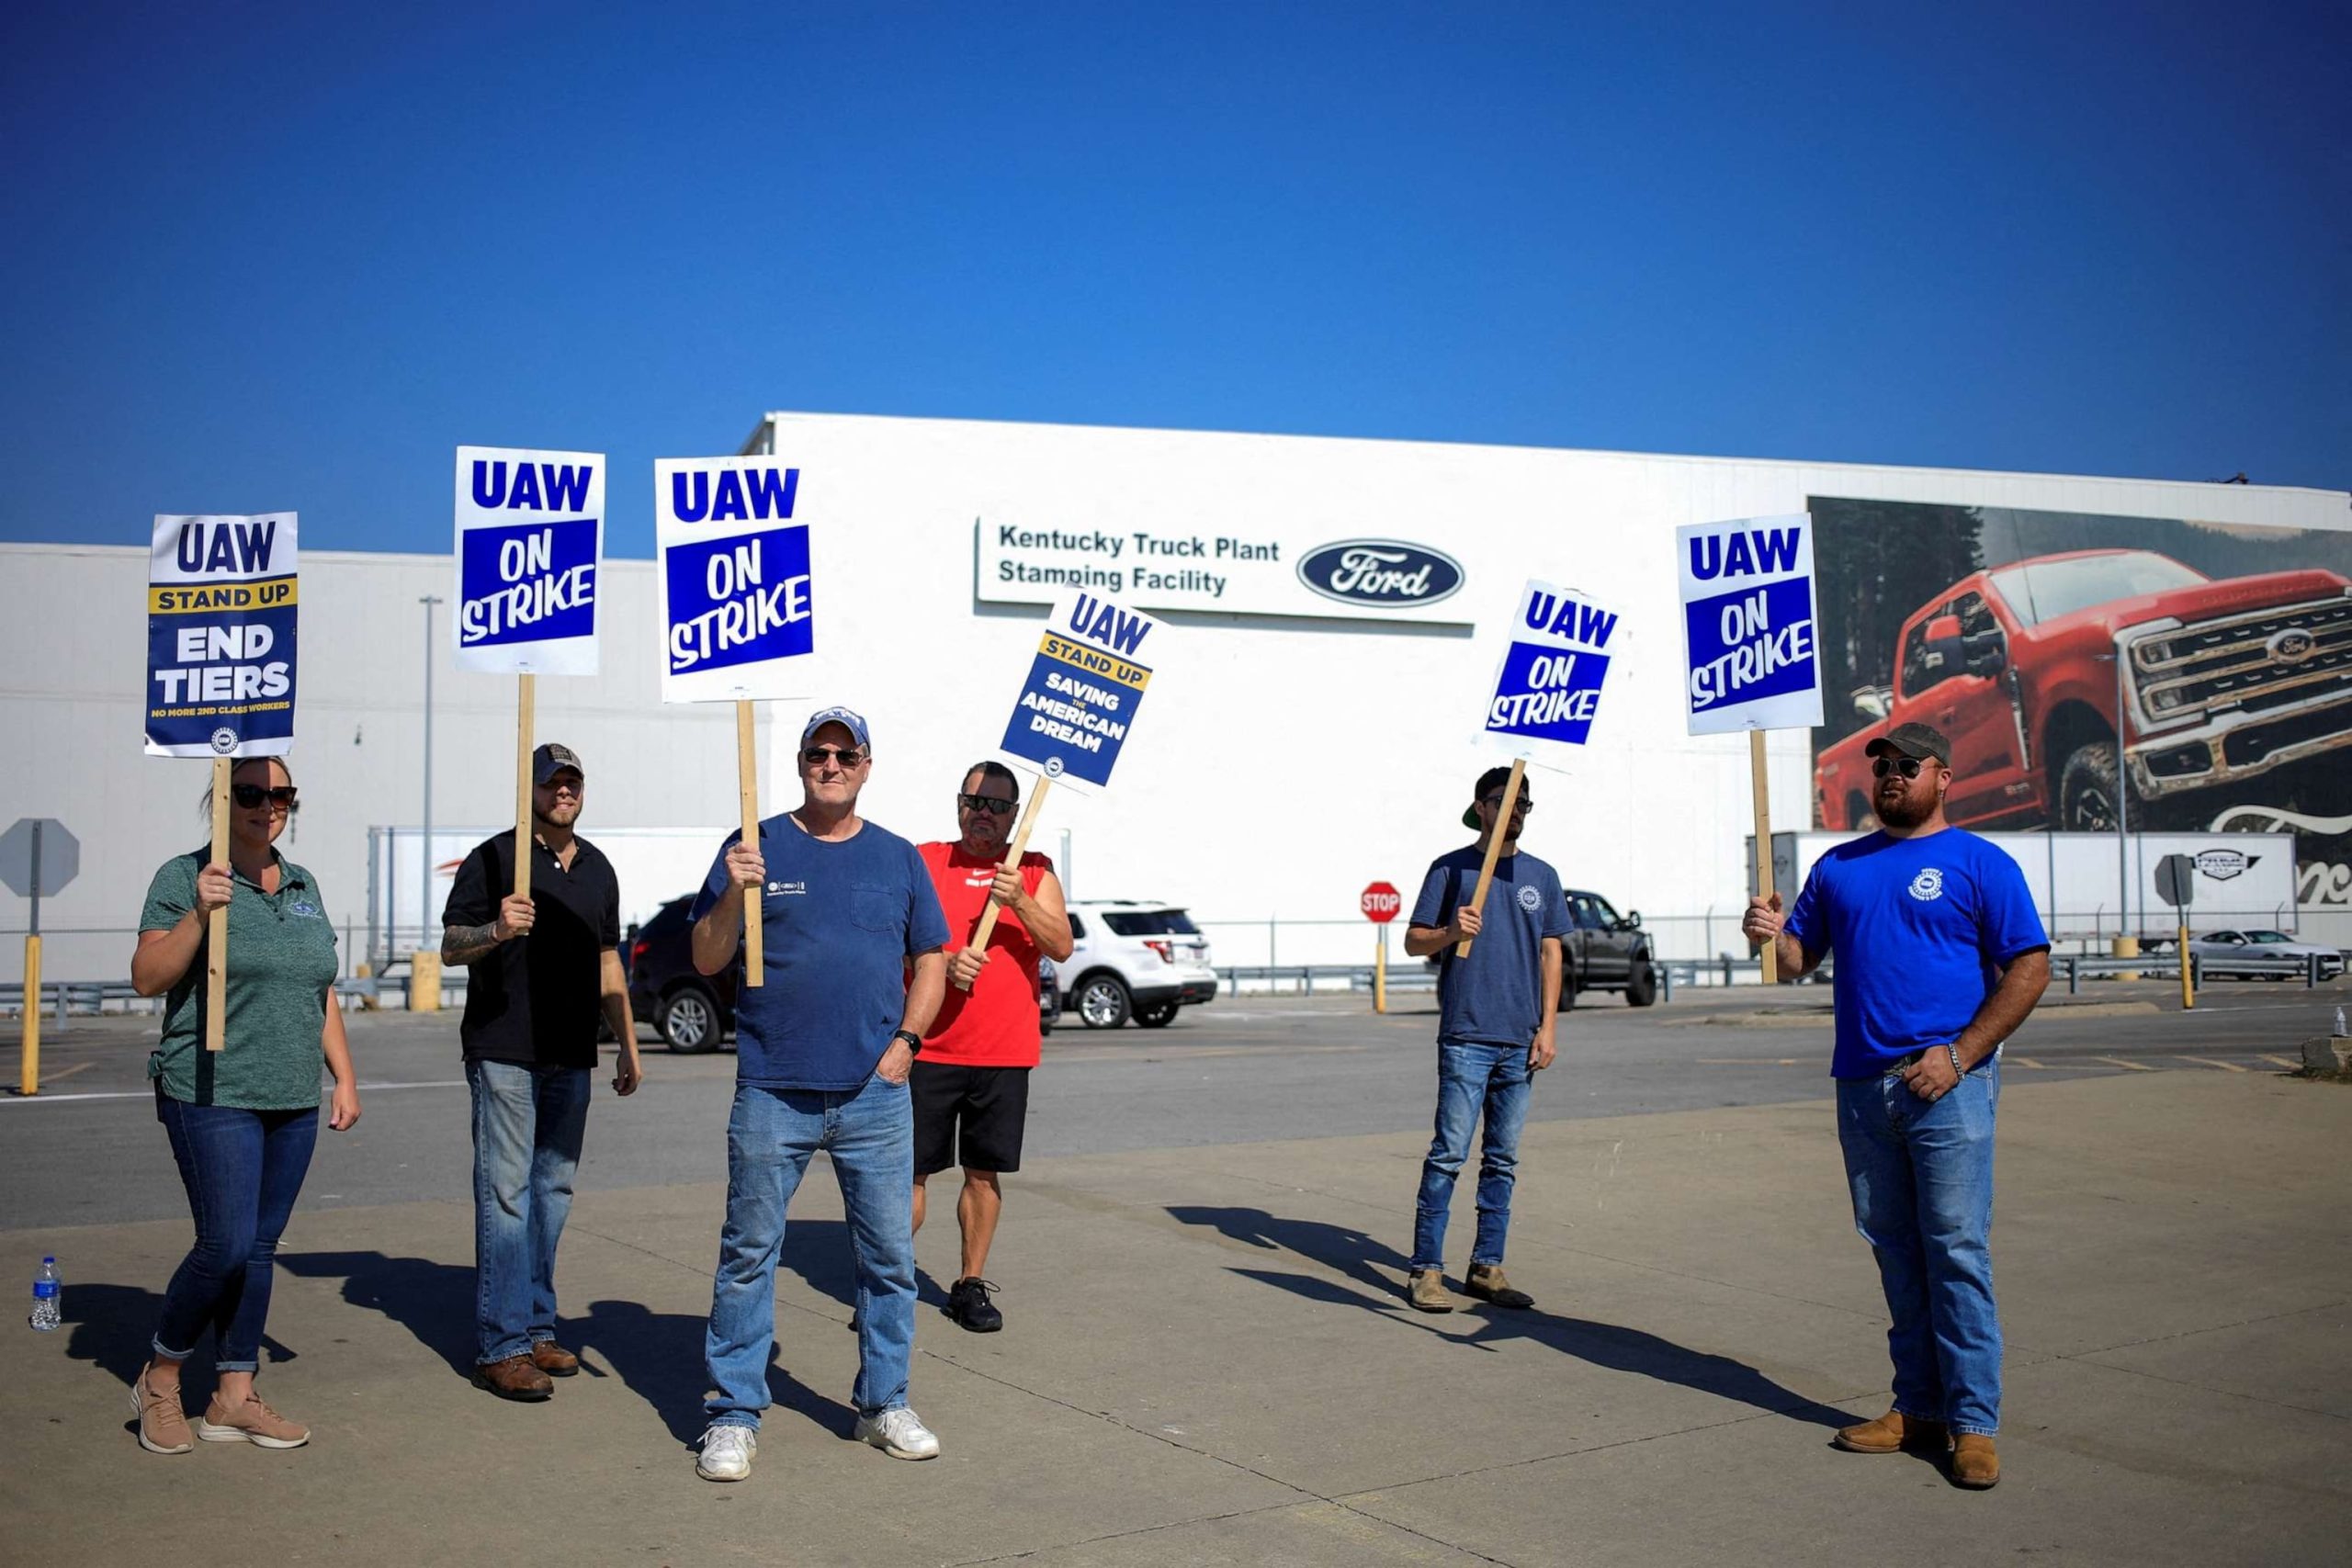 Sources report that the UAW has reached a tentative agreement with Ford